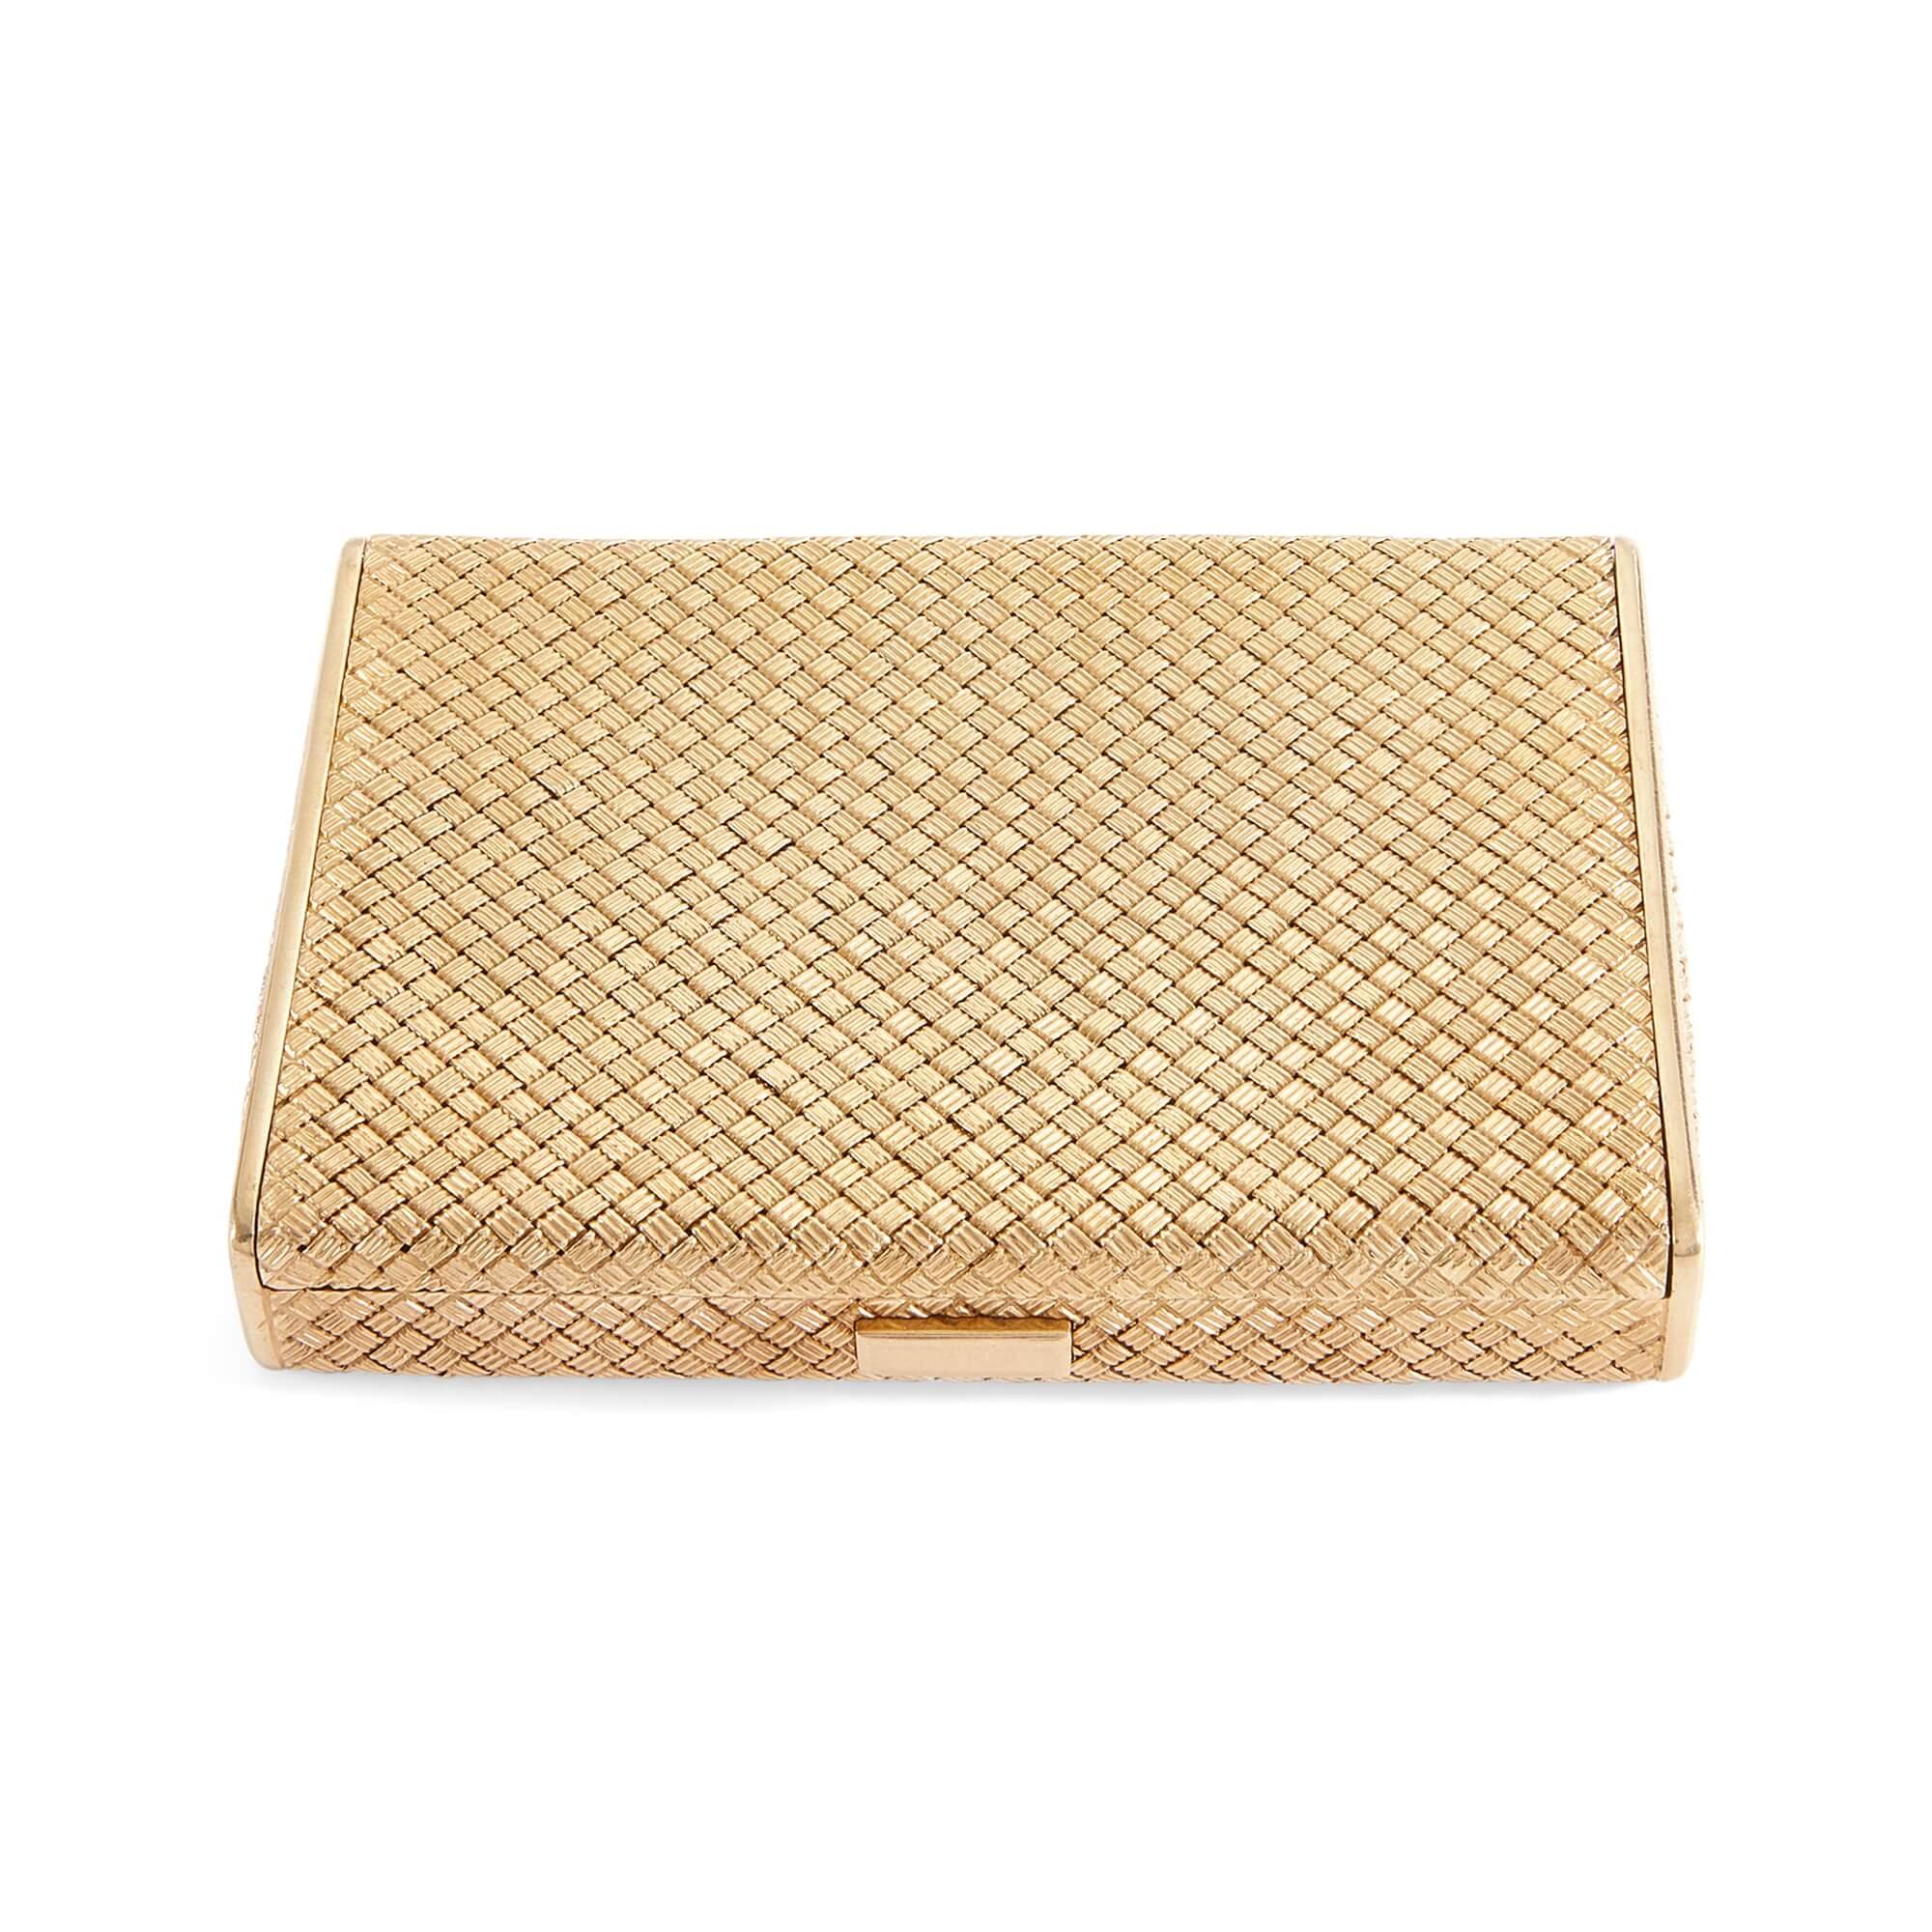 Basket weave design 18k gold cigarette box 
Continental, Early 20th century
Height 1.5cm, width 9cm, depth 6.5cm

This elegant cigarette box is beautifully made from 18k gold. The box opens with a push of the smooth button positioned at the